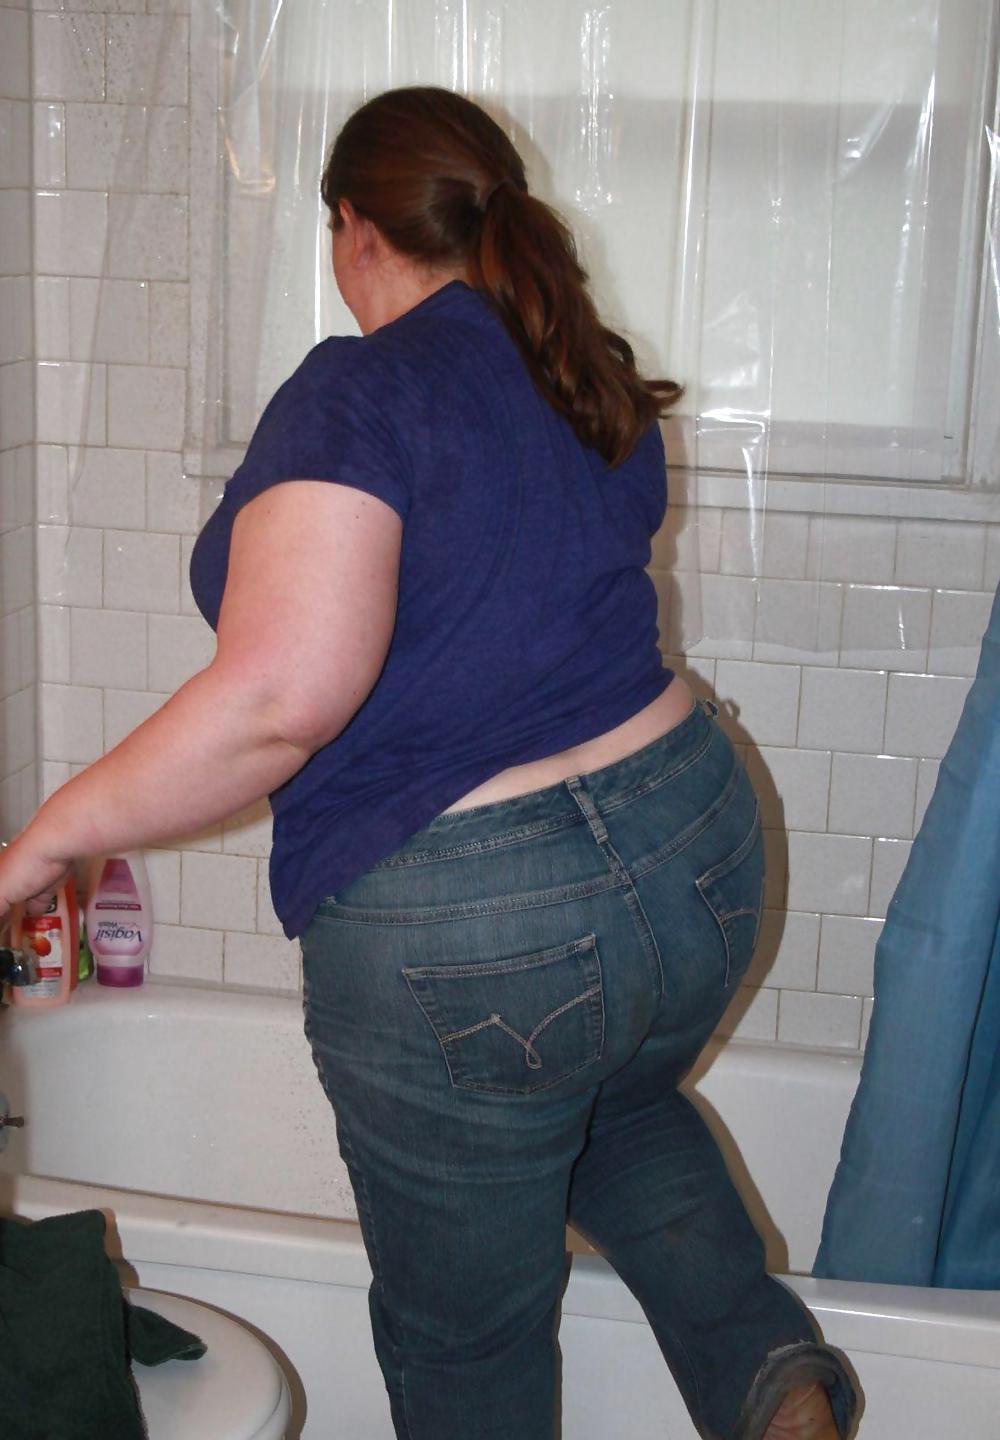 BBW in Tight Jeans! Collection #3 #22173873